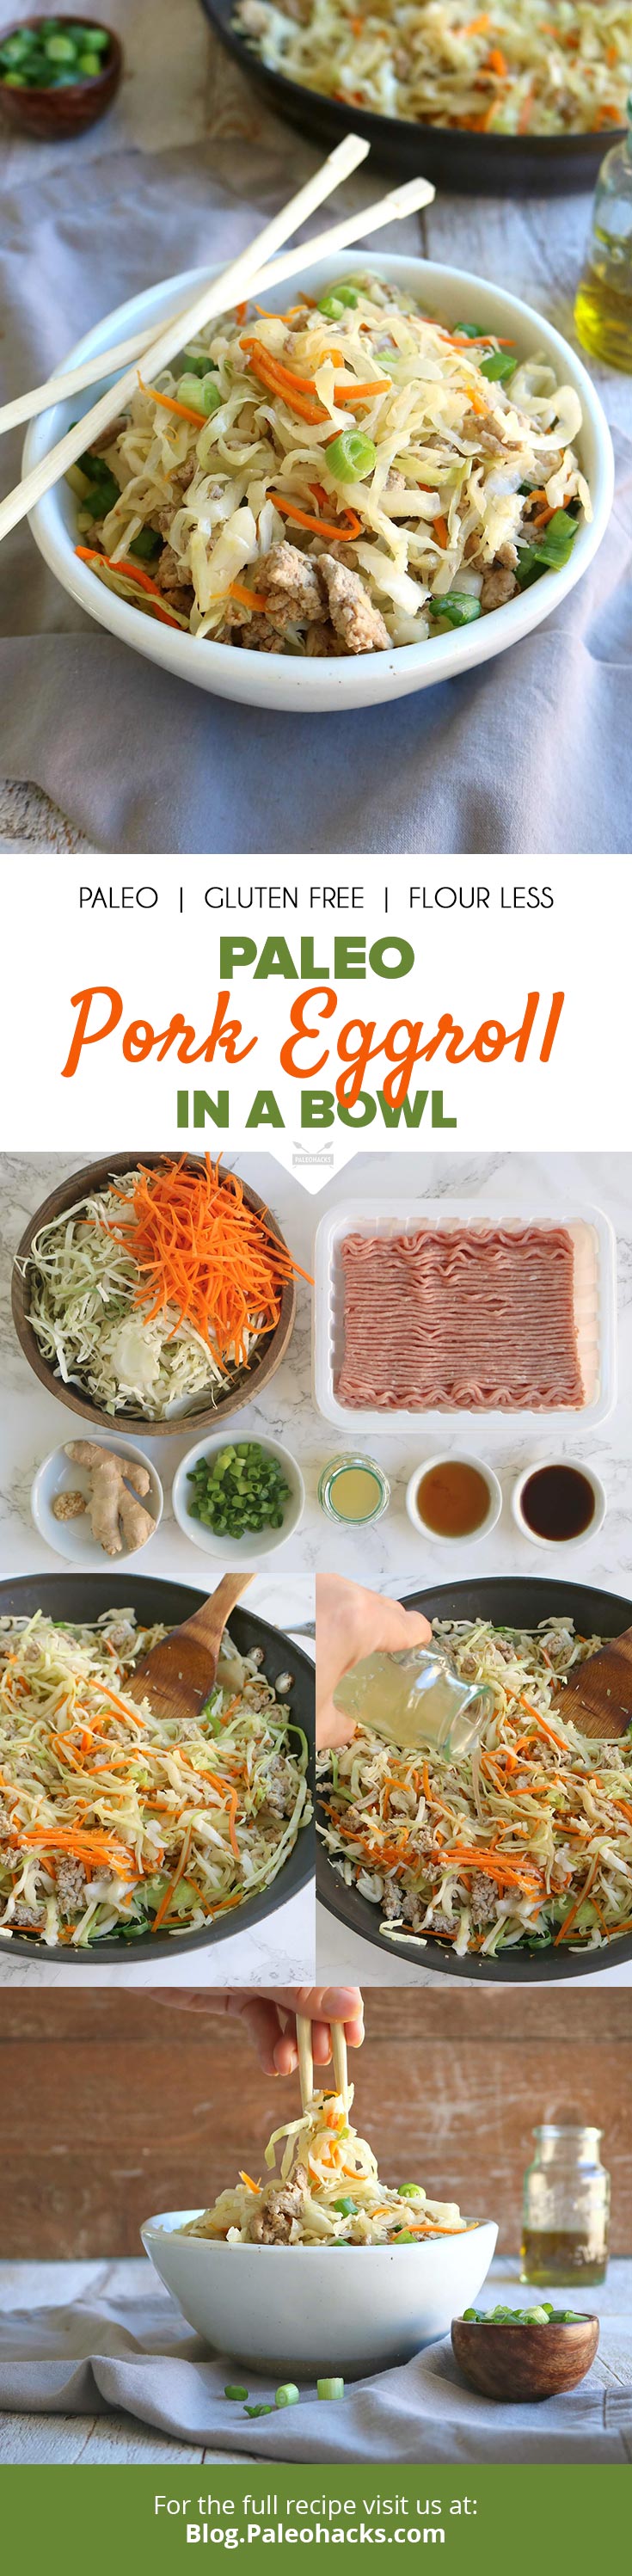 Your favorite takeout appetizer gets a Paleo makeover! Shredded veggies and saucy pork steal the show in this deconstructed egg roll bowl.